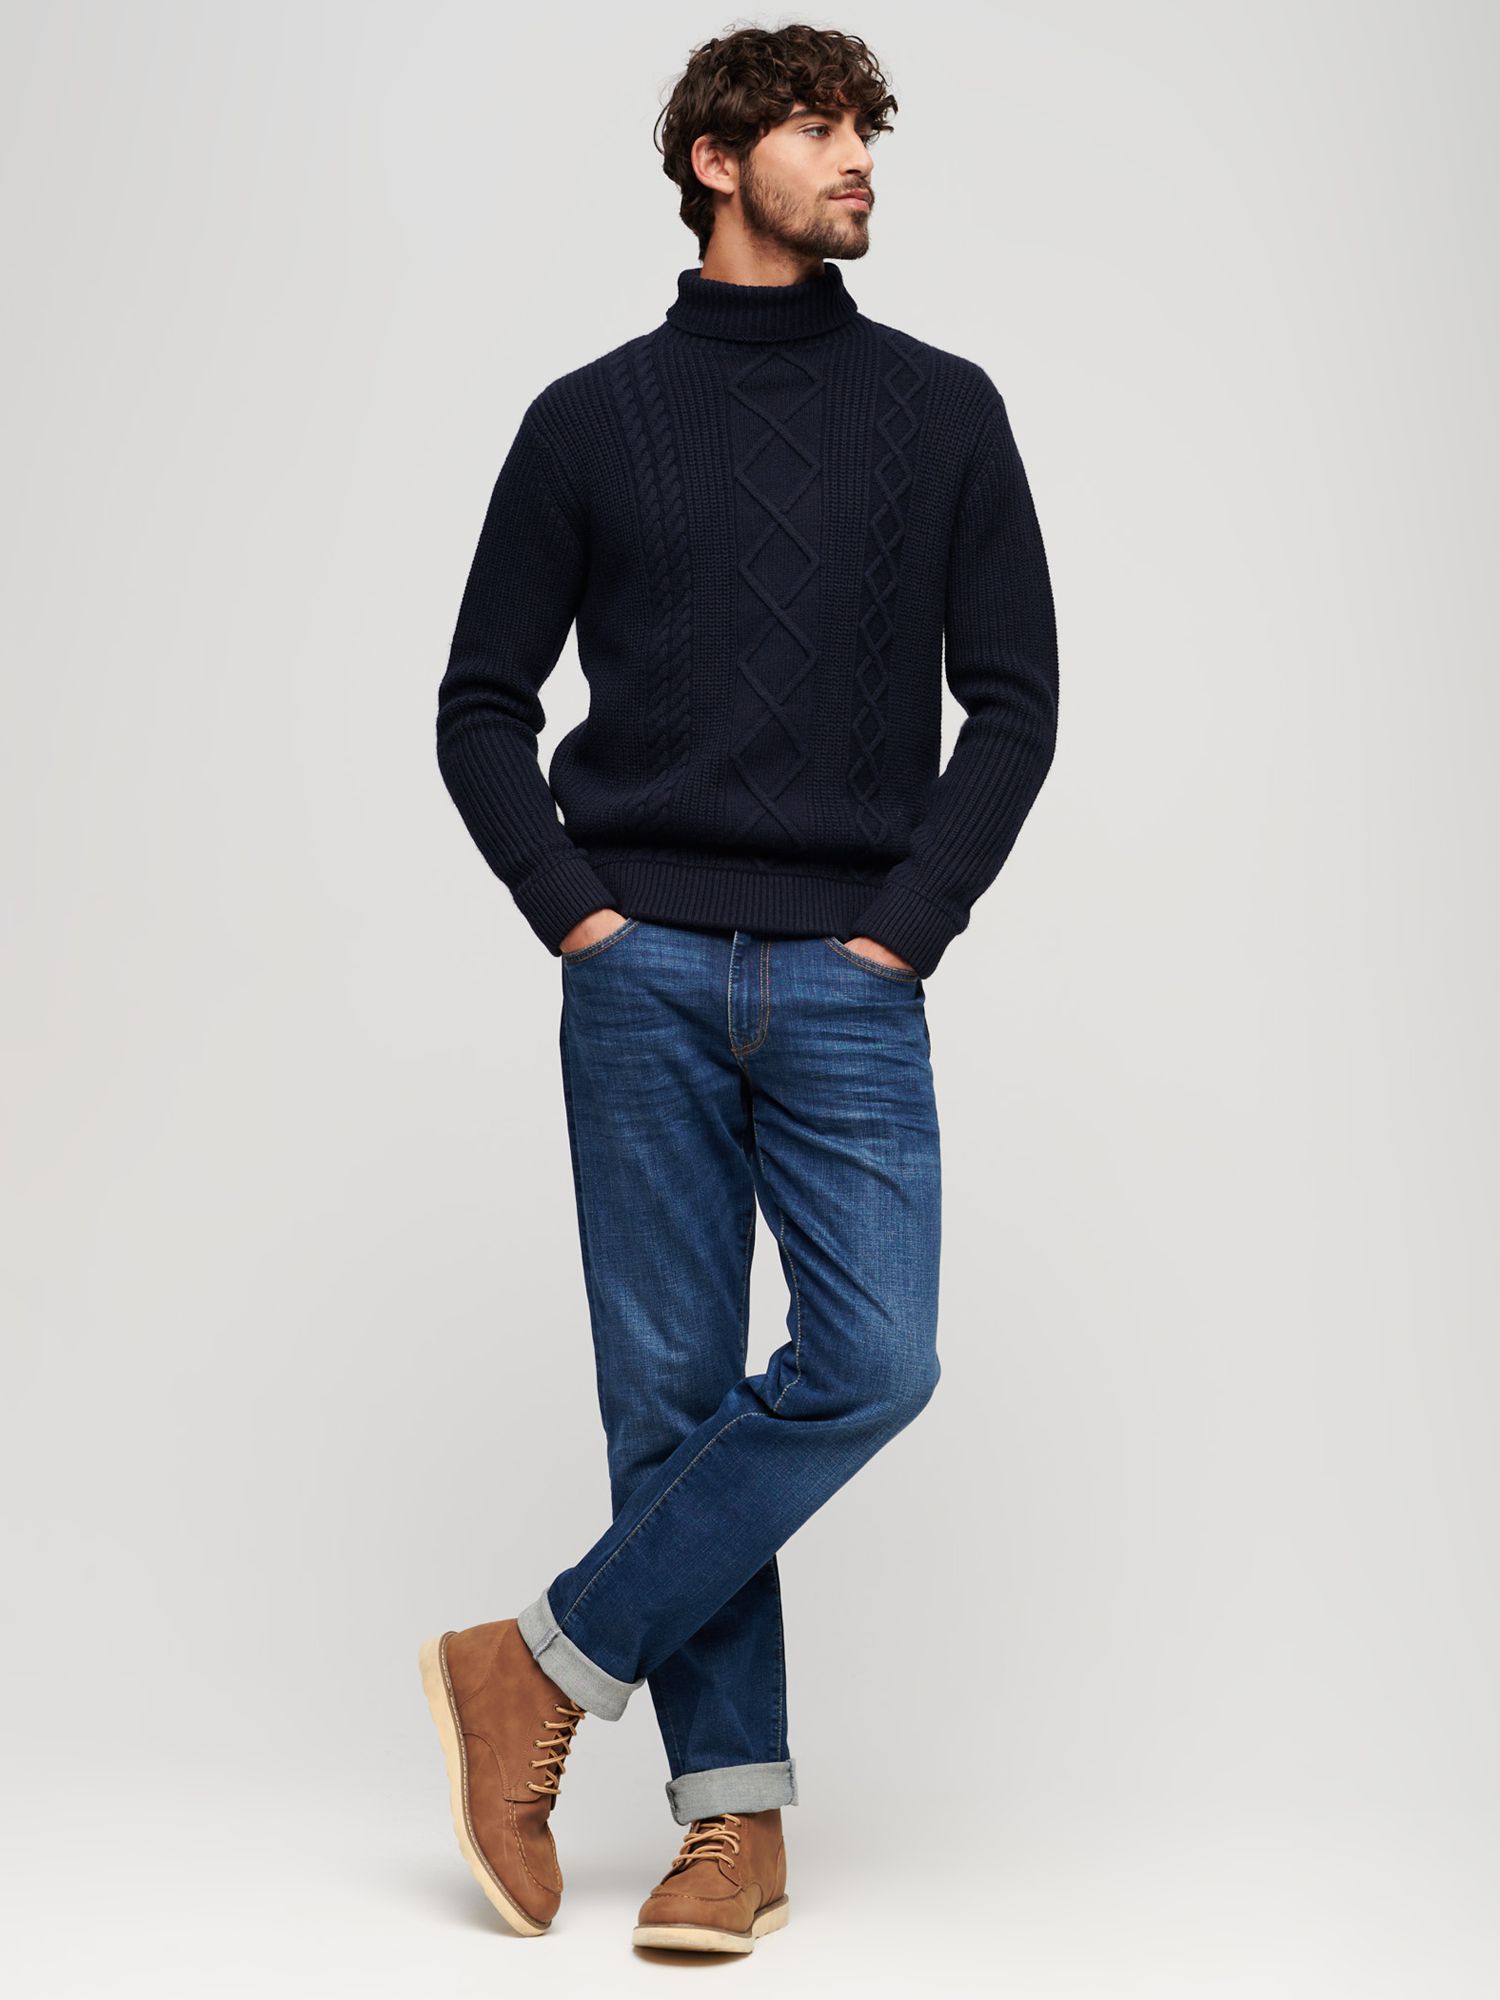 Superdry Wool Blend Cable Roll Neck Jumper, Navy, S